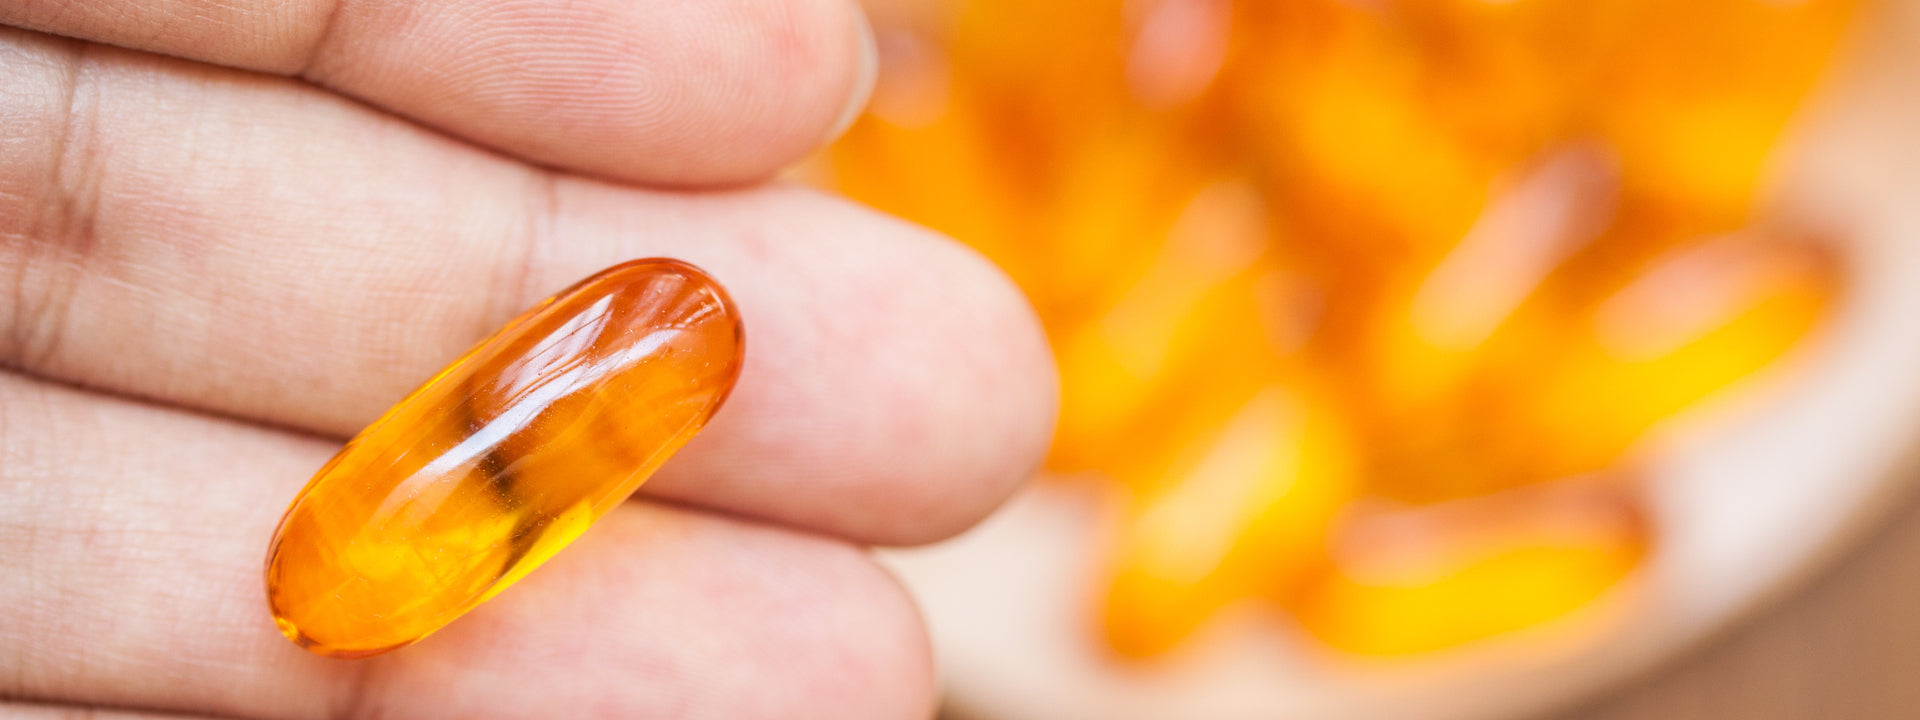 Watch Out For These Fish Oil Myths